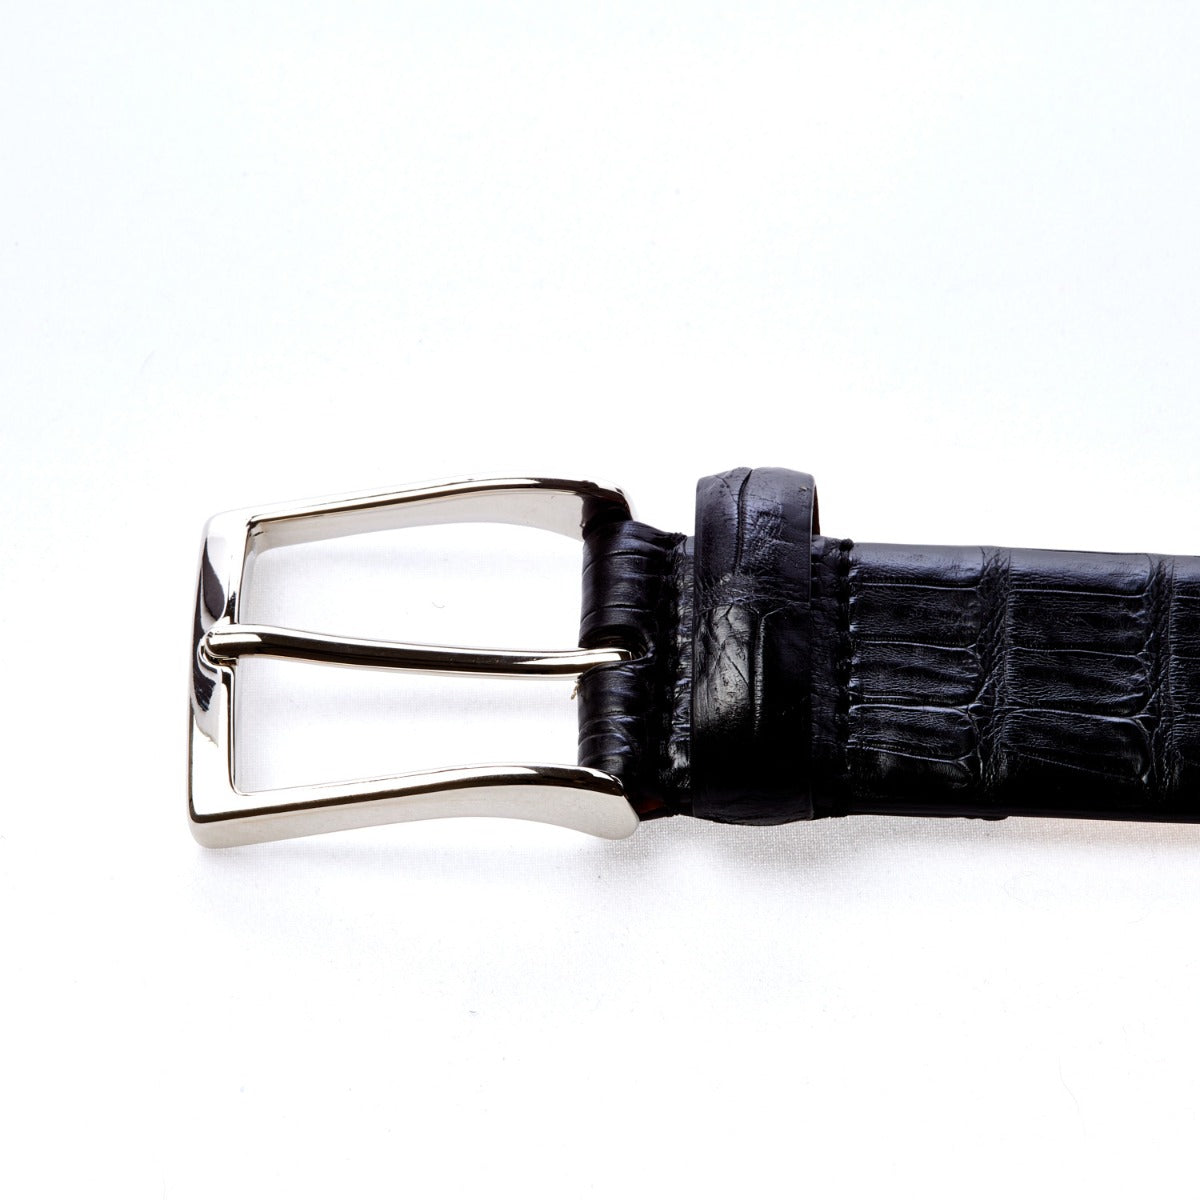 A Sovereign Grade Black Crocodile Belt with a crocodile skin texture, handcrafted in Italy by KirbyAllison.com.